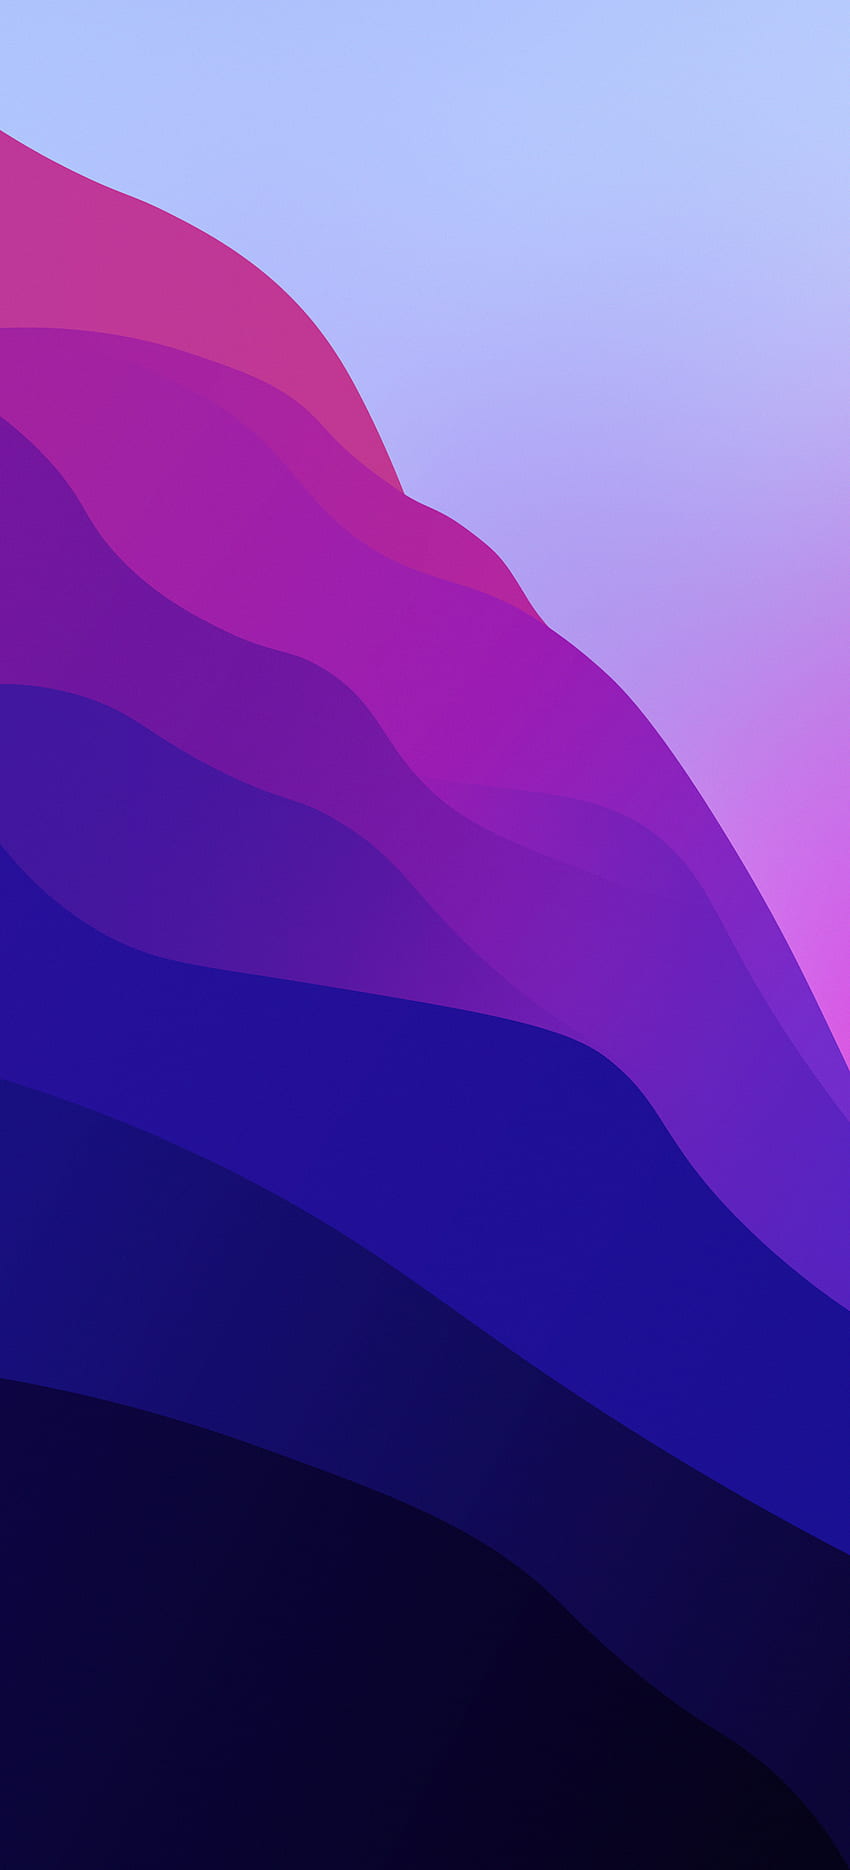 macOS Monterey inspired “Waves” for iPhone HD phone wallpaper